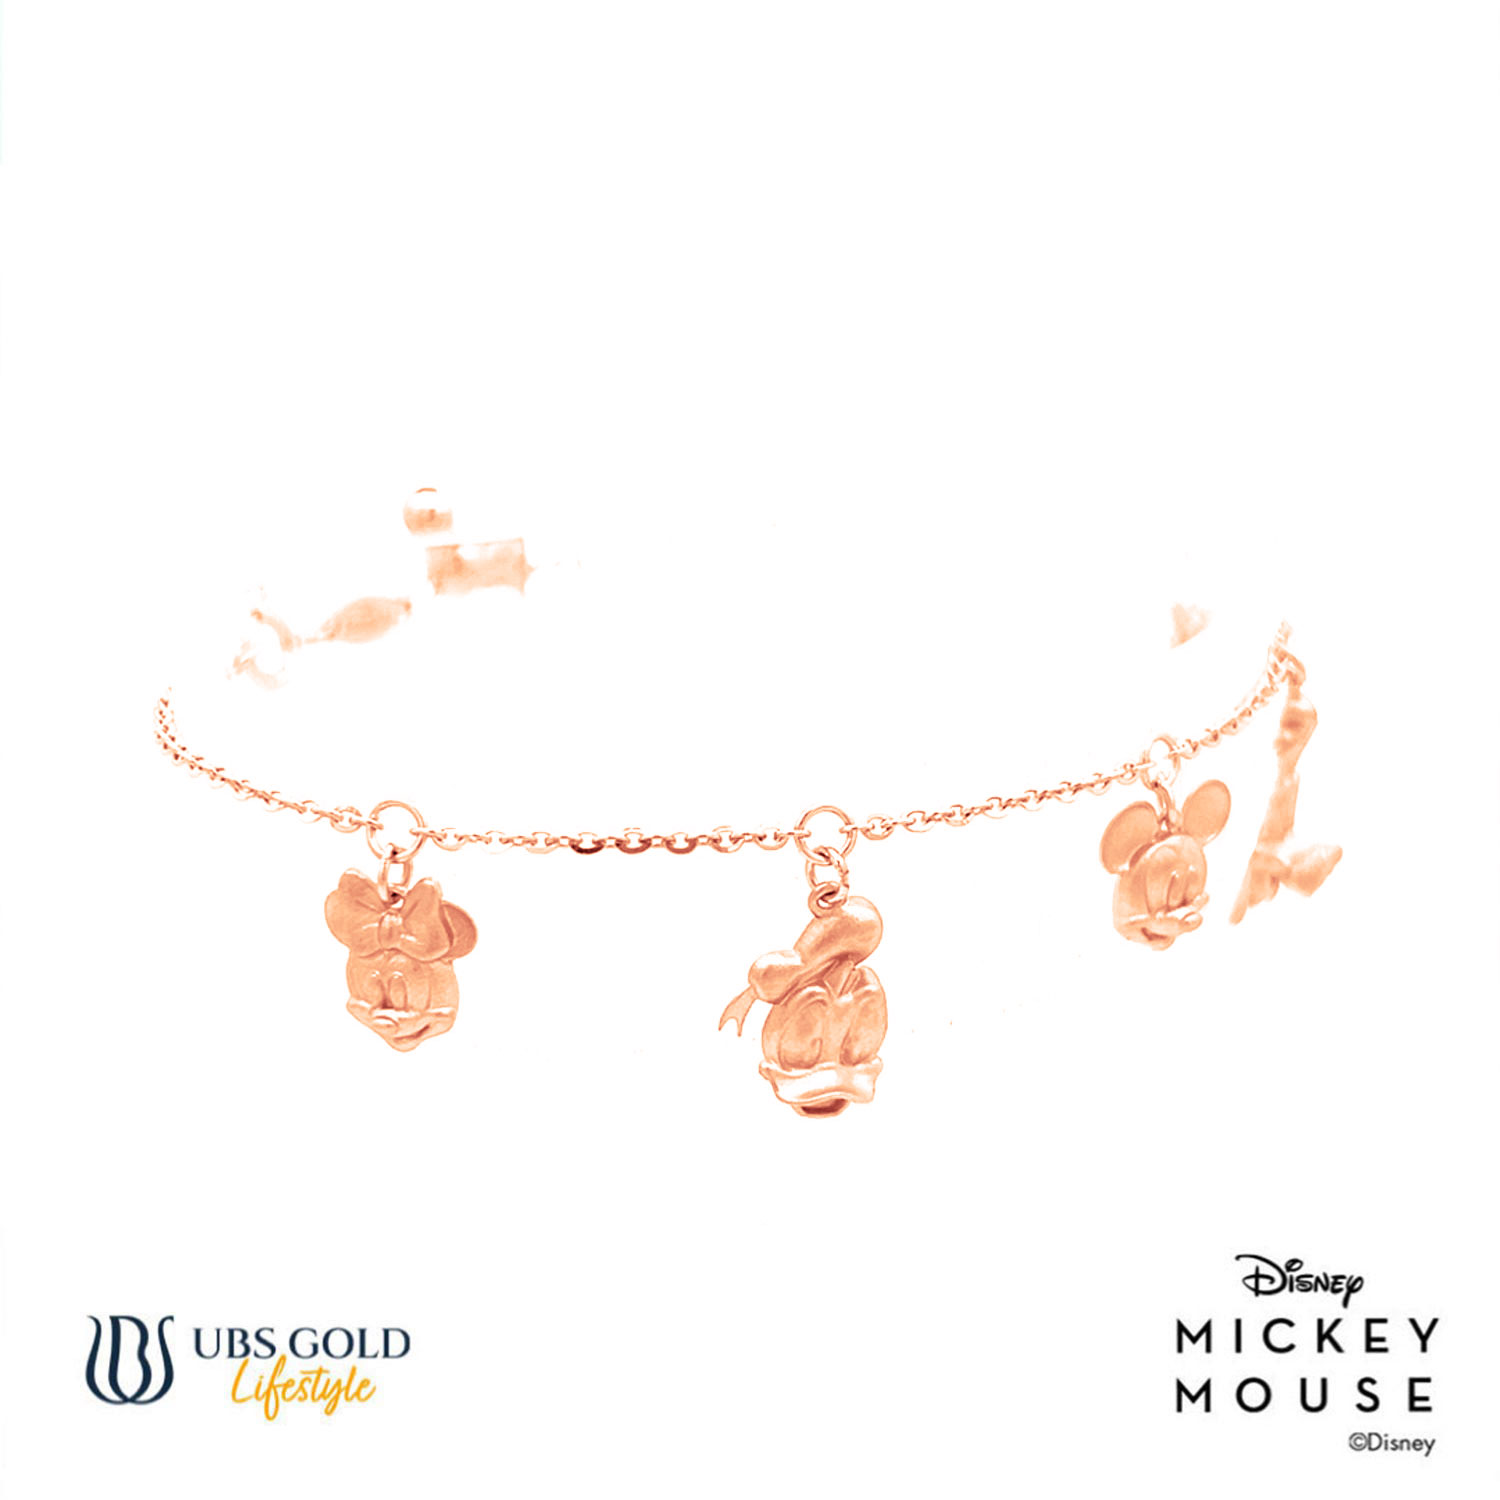 UBS Gold Gelang Emas Disney Mickey and Friends - Kgy0128 - 17K